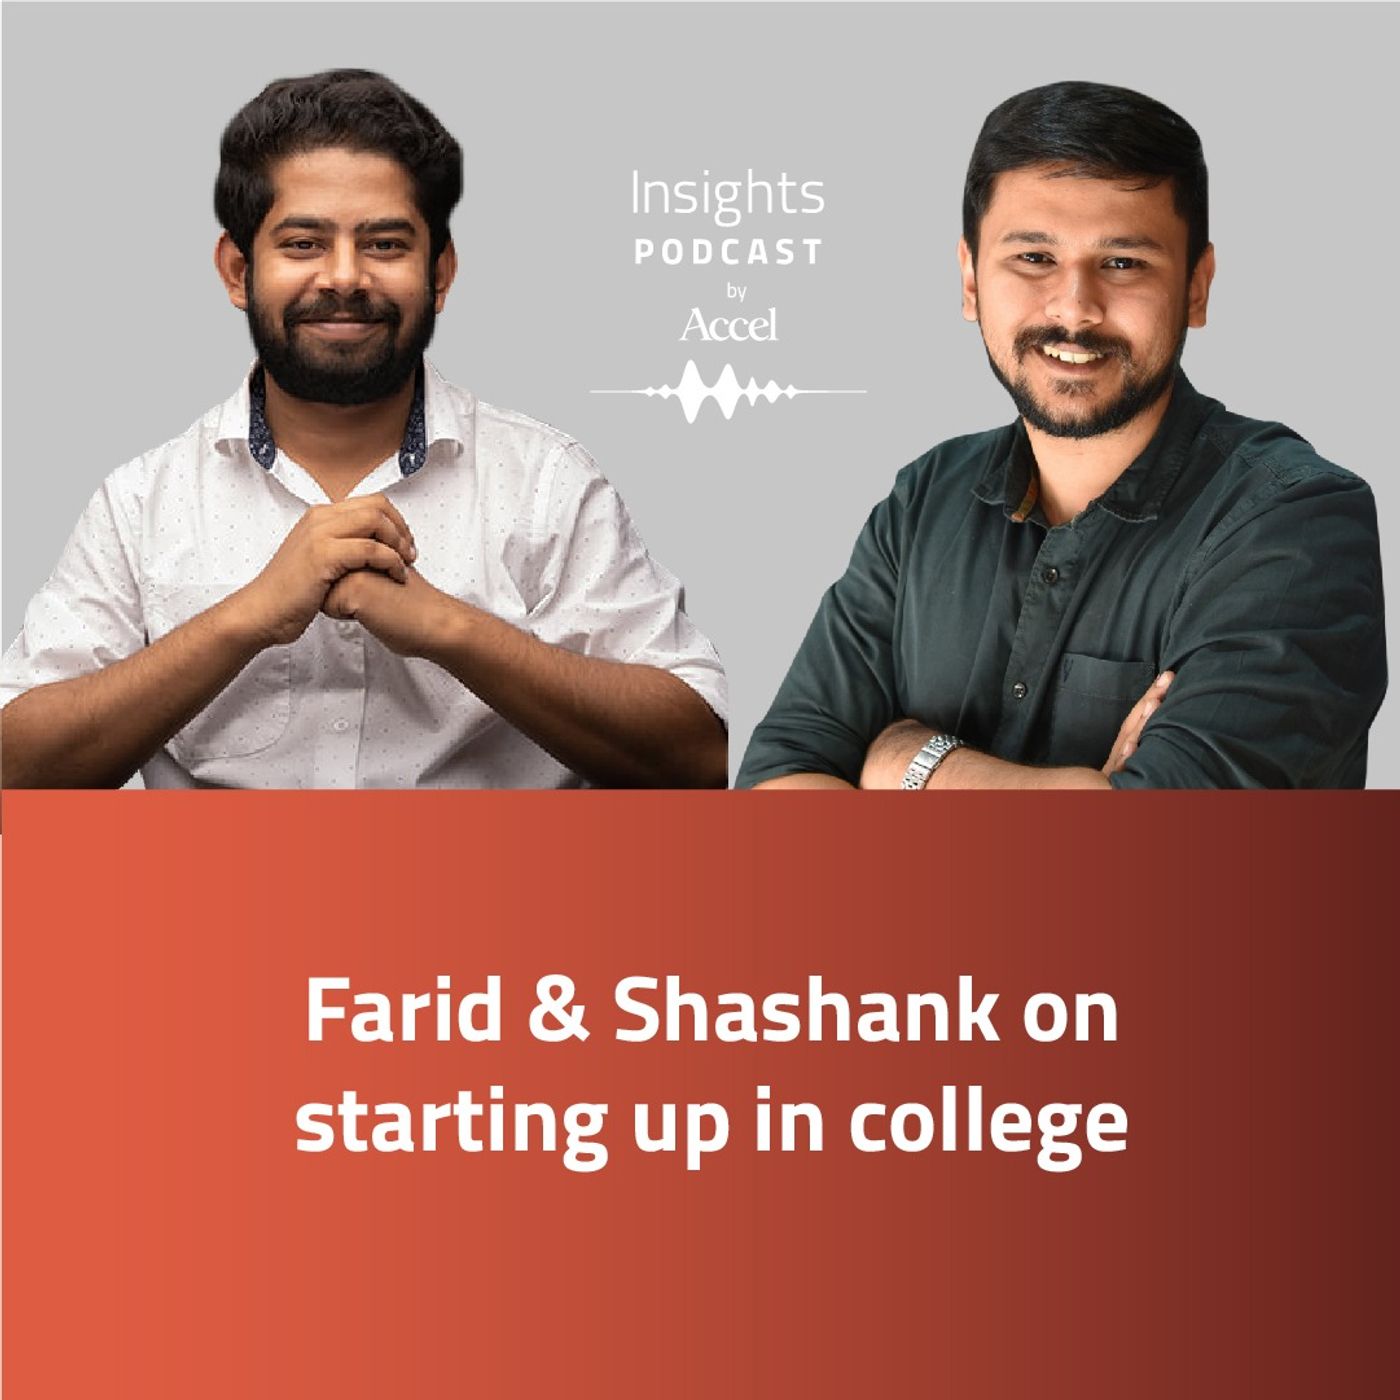 INSIGHTS #54 – Farid & Shashank on starting up in college